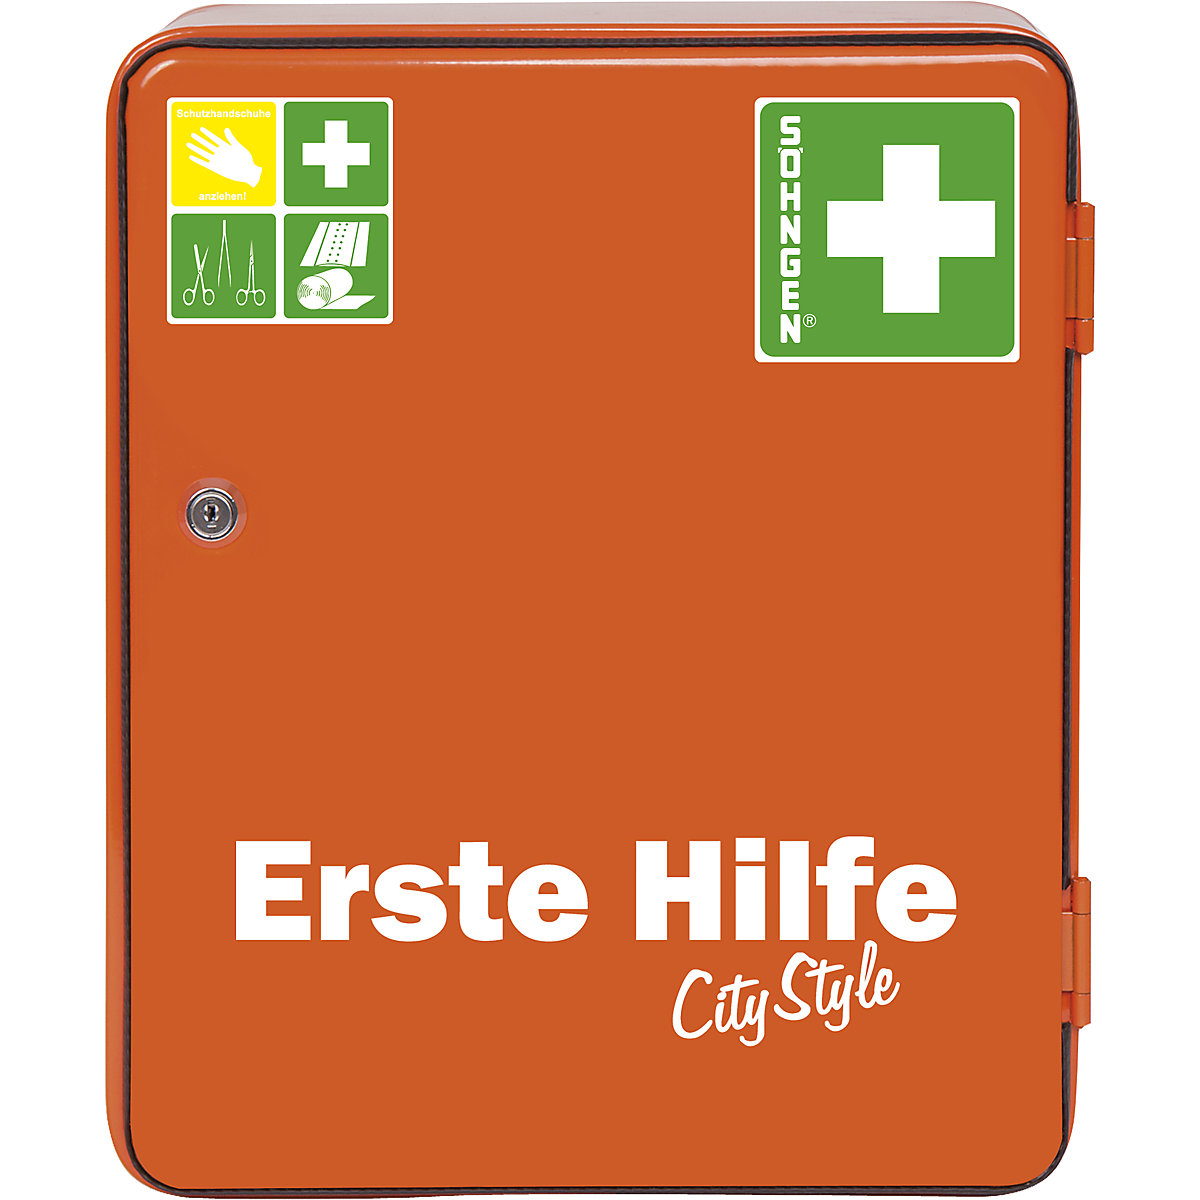 HEIDELBERG City Style first aid cabinet to DIN 13157 – SÖHNGEN: HxWxD 362 x  302 x 140 mm, with contents